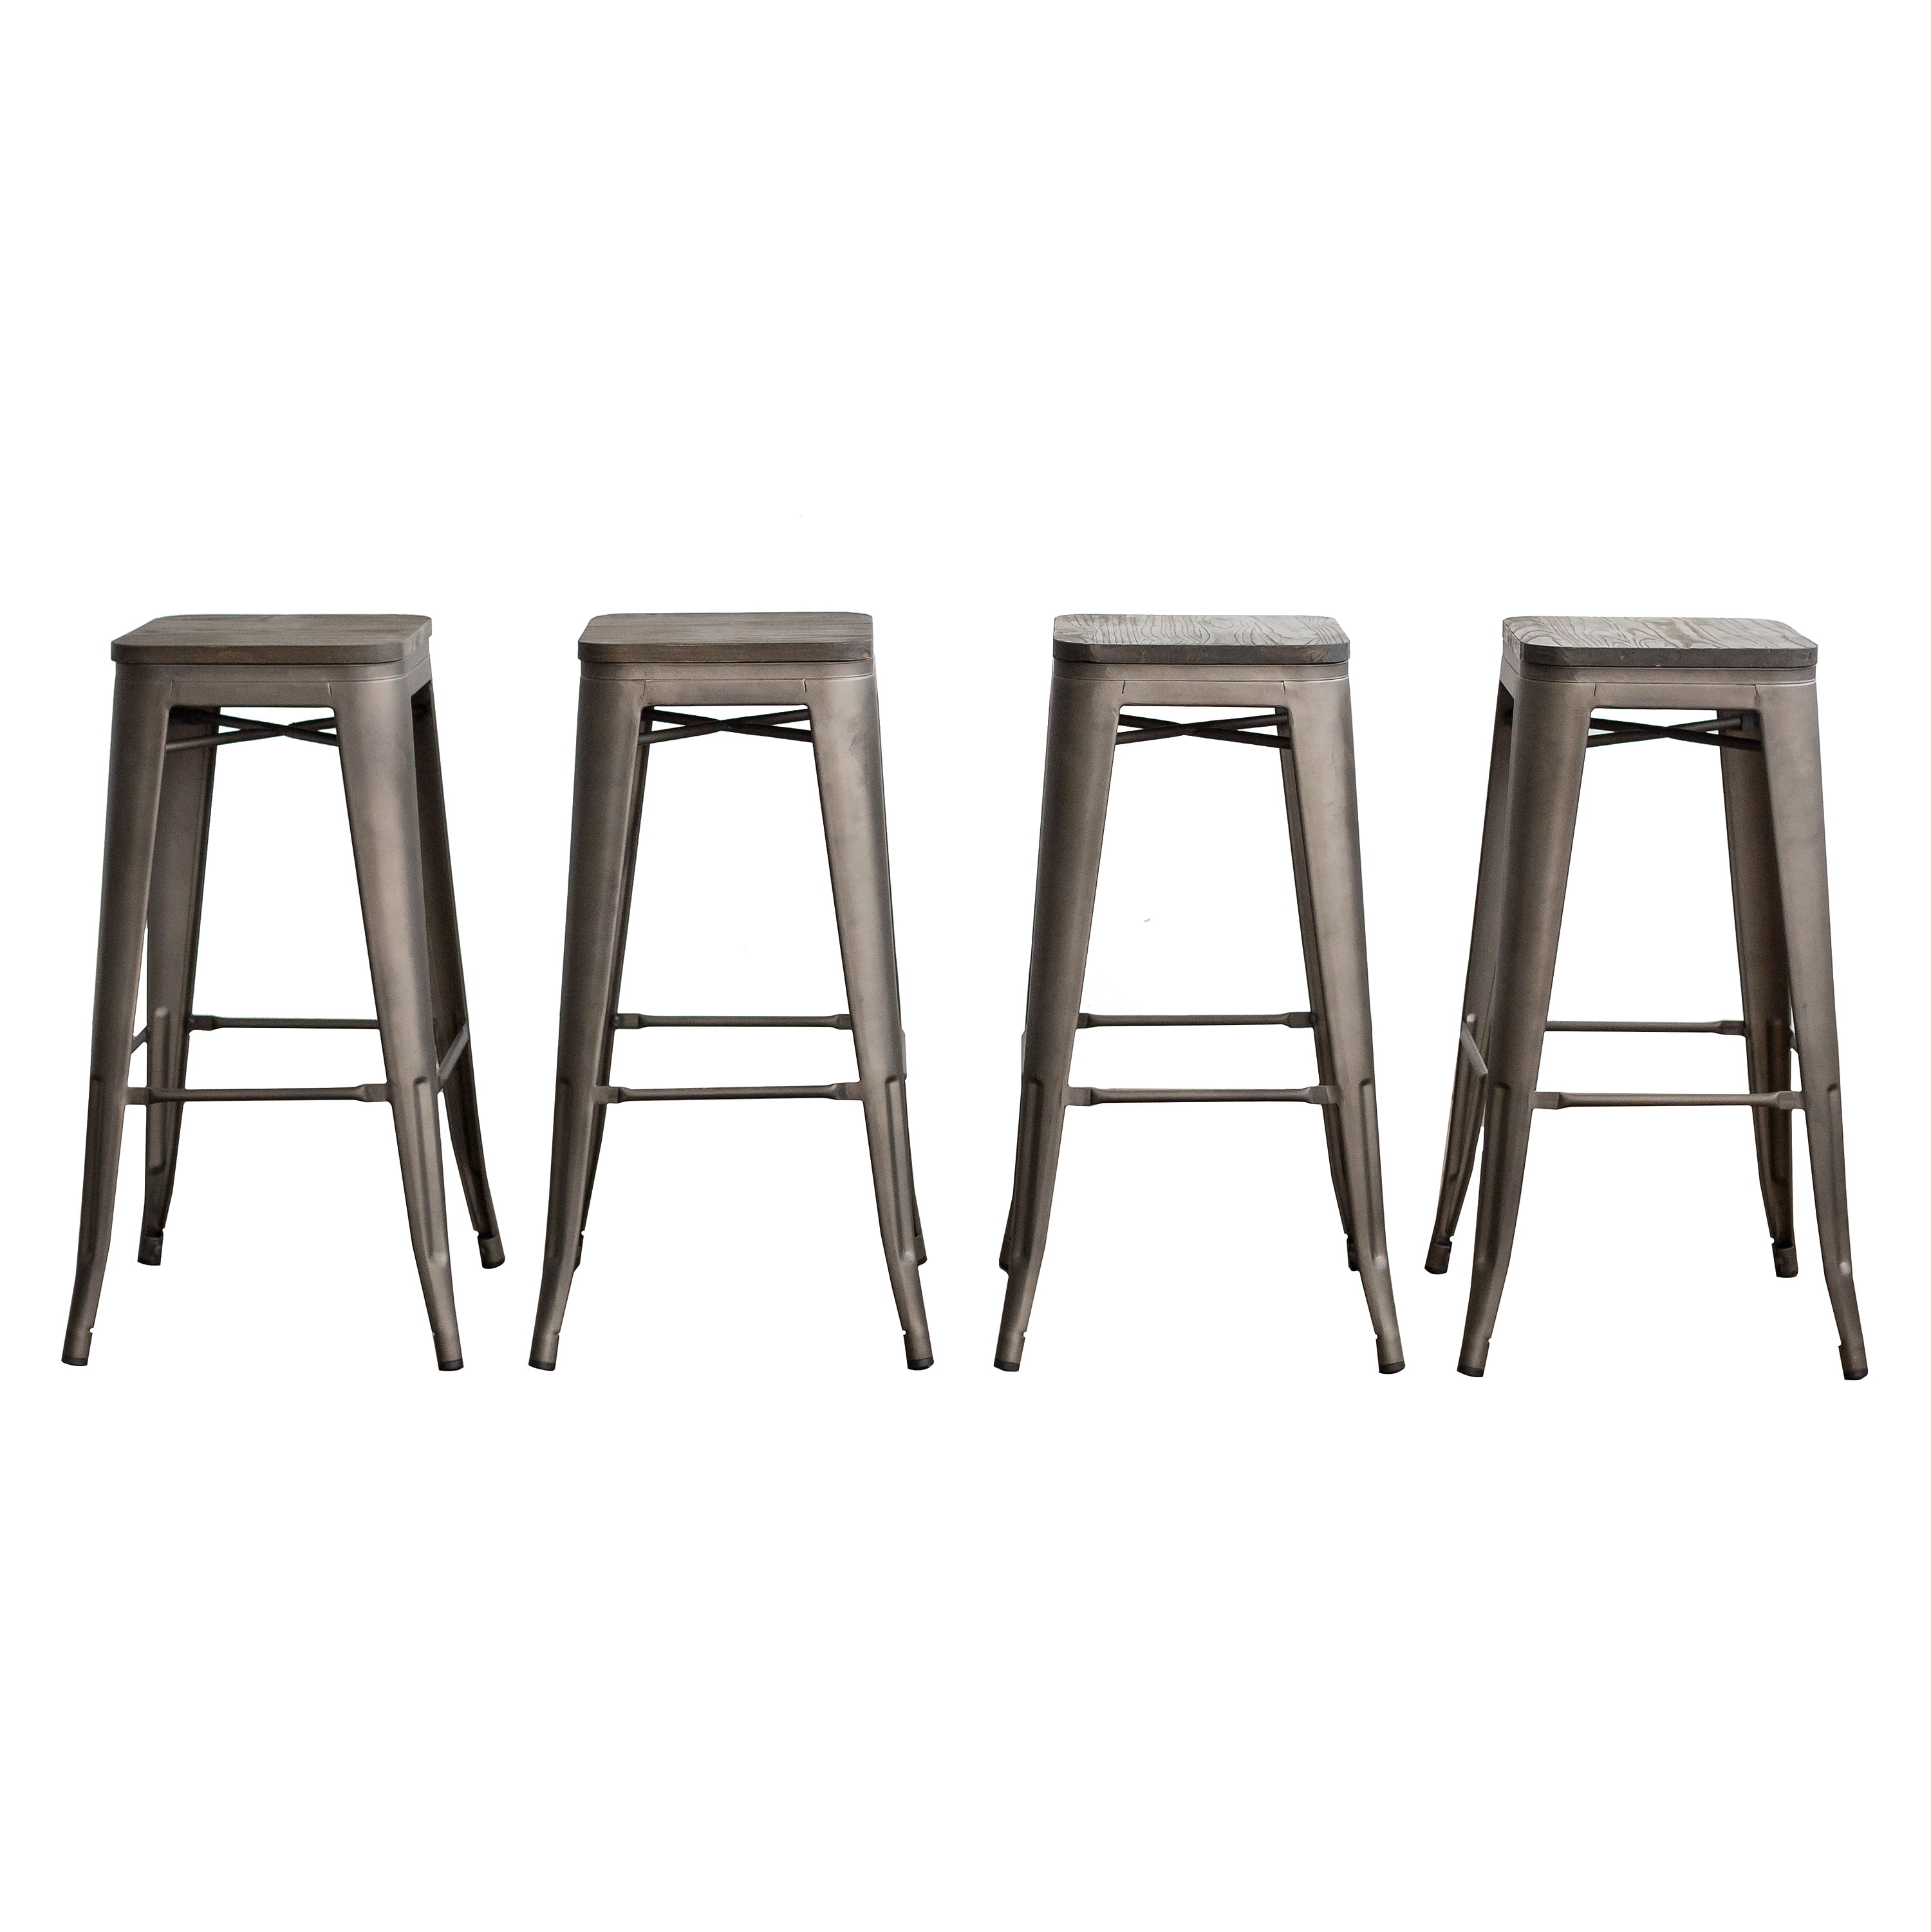 Stackable Set of Four Bronze 24 Inches Counter High Bar Stools Indoor/Outdoor 